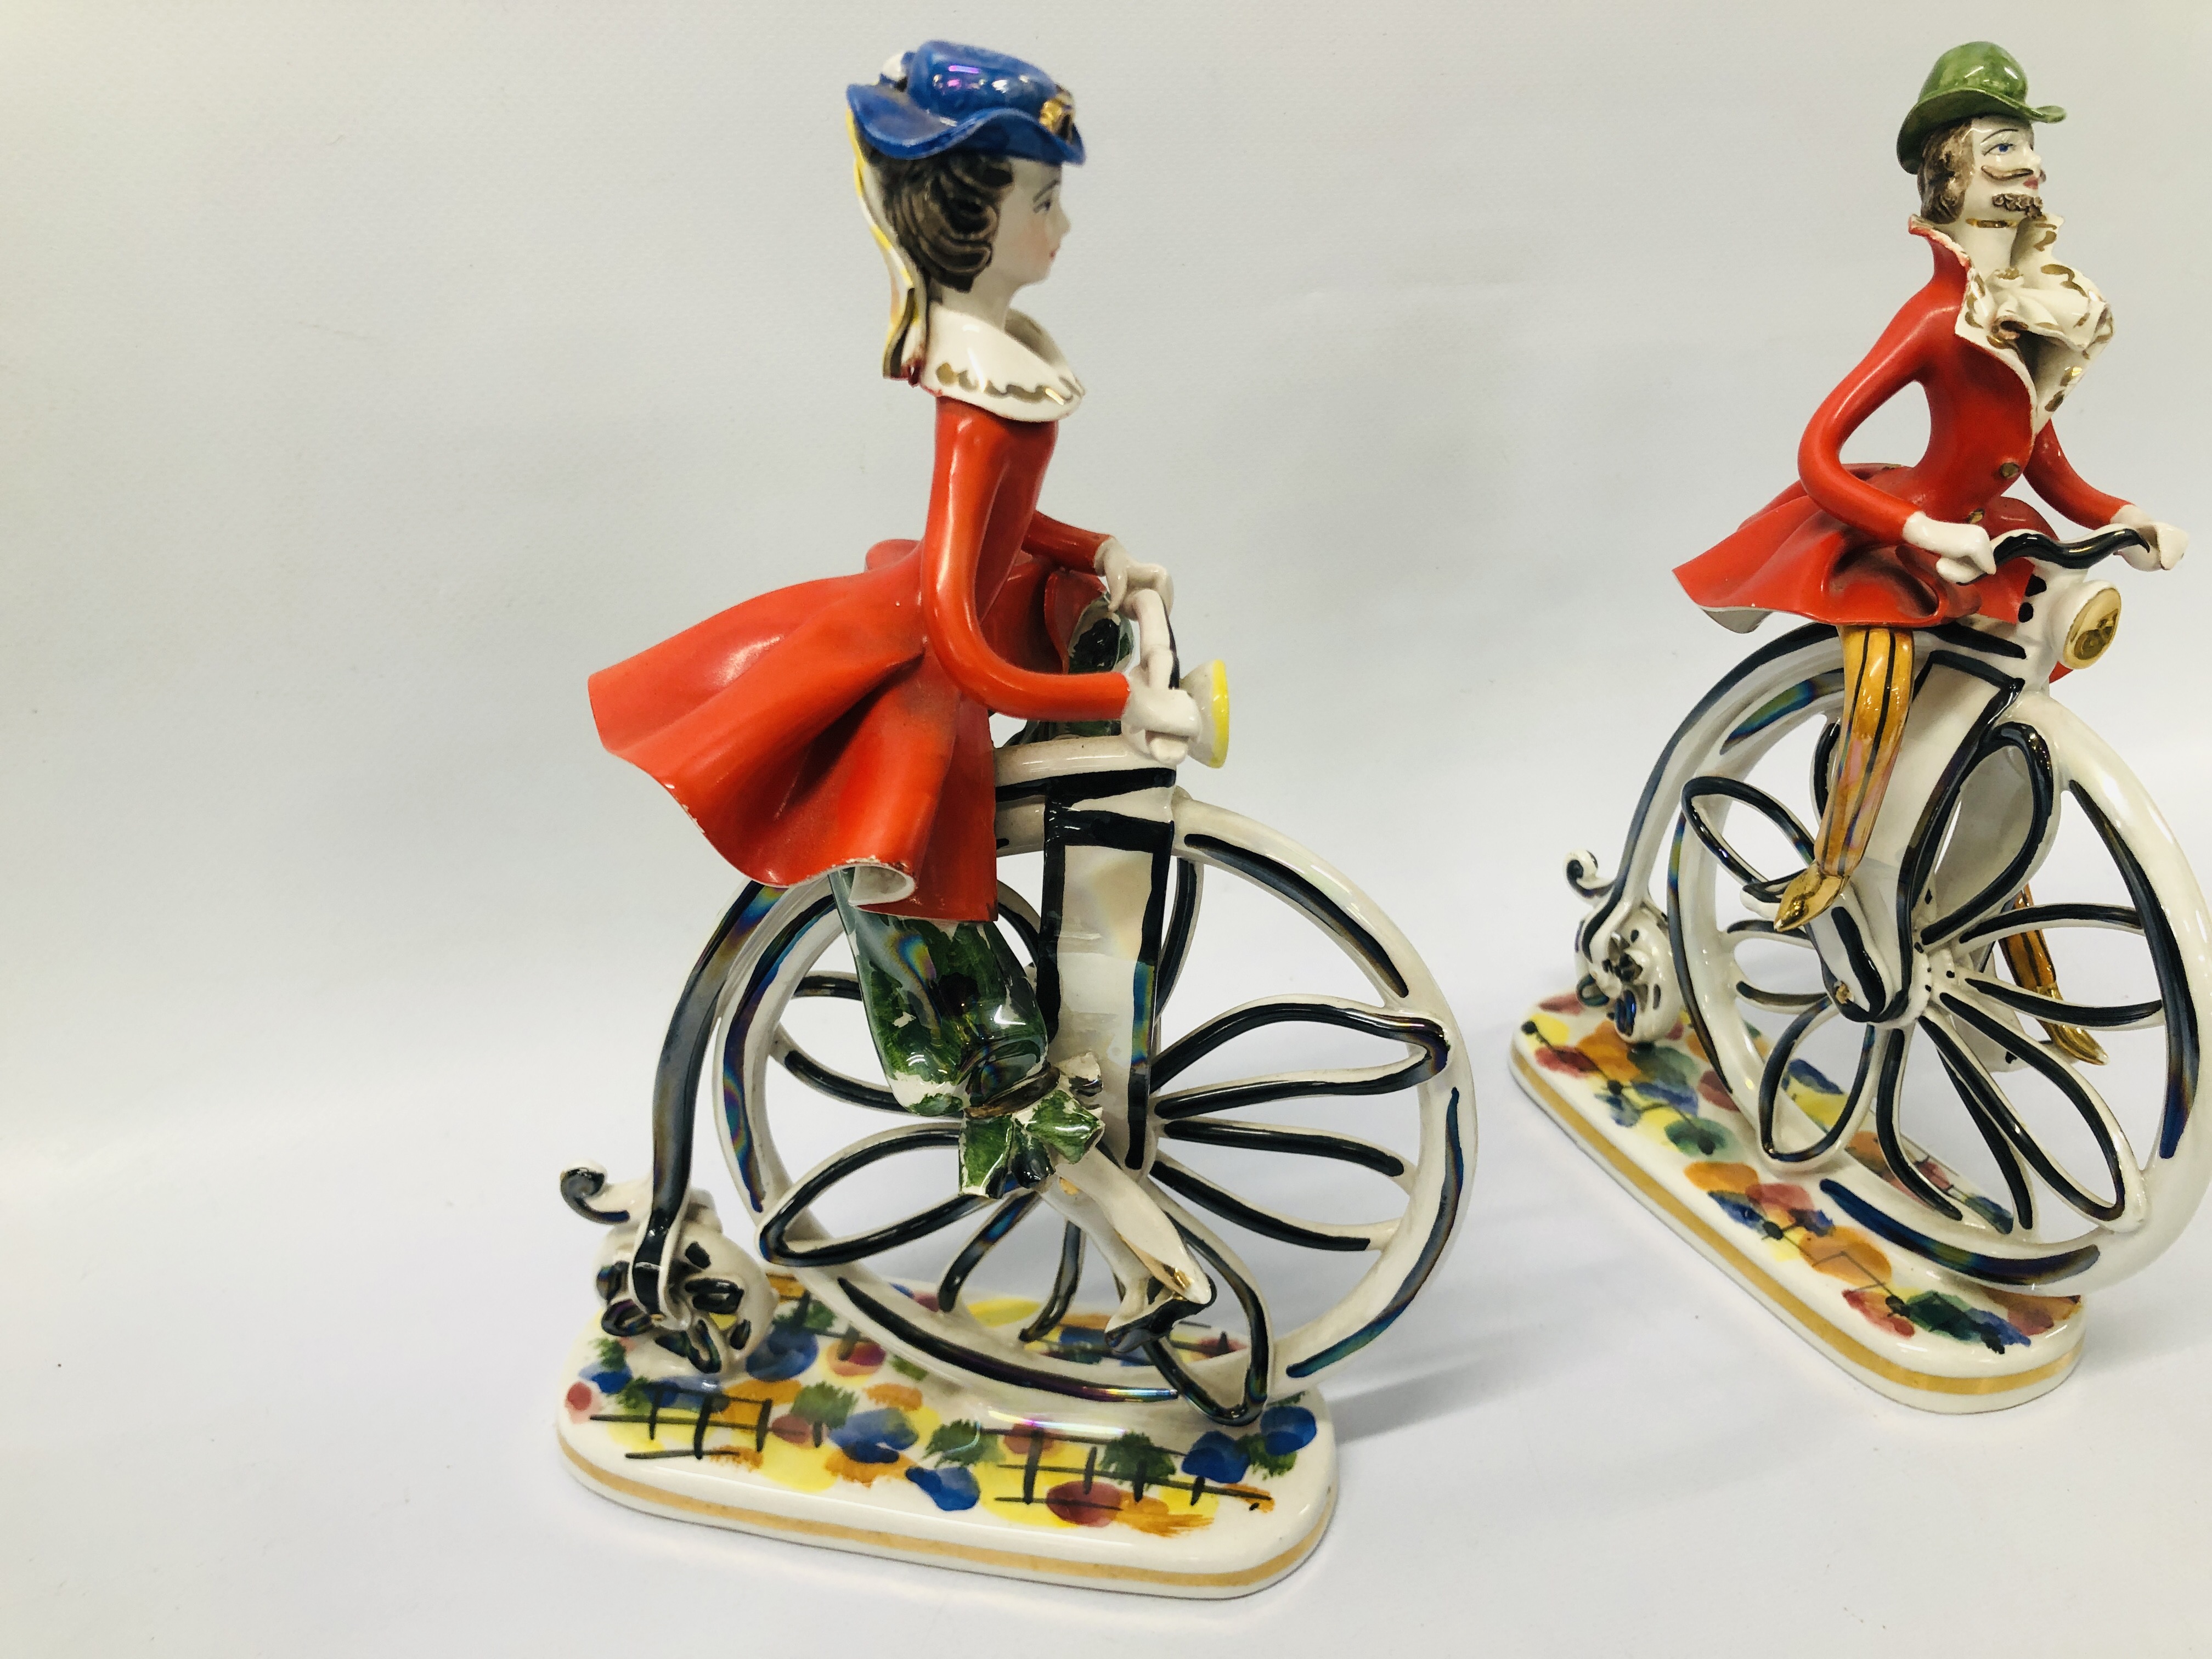 PAIR OF ITALIAN ORNAMENTS "LADY'S UPON PENNY FARTHINGS" H 24CM ALONG WITH A FIGURED CABINET - Image 8 of 10